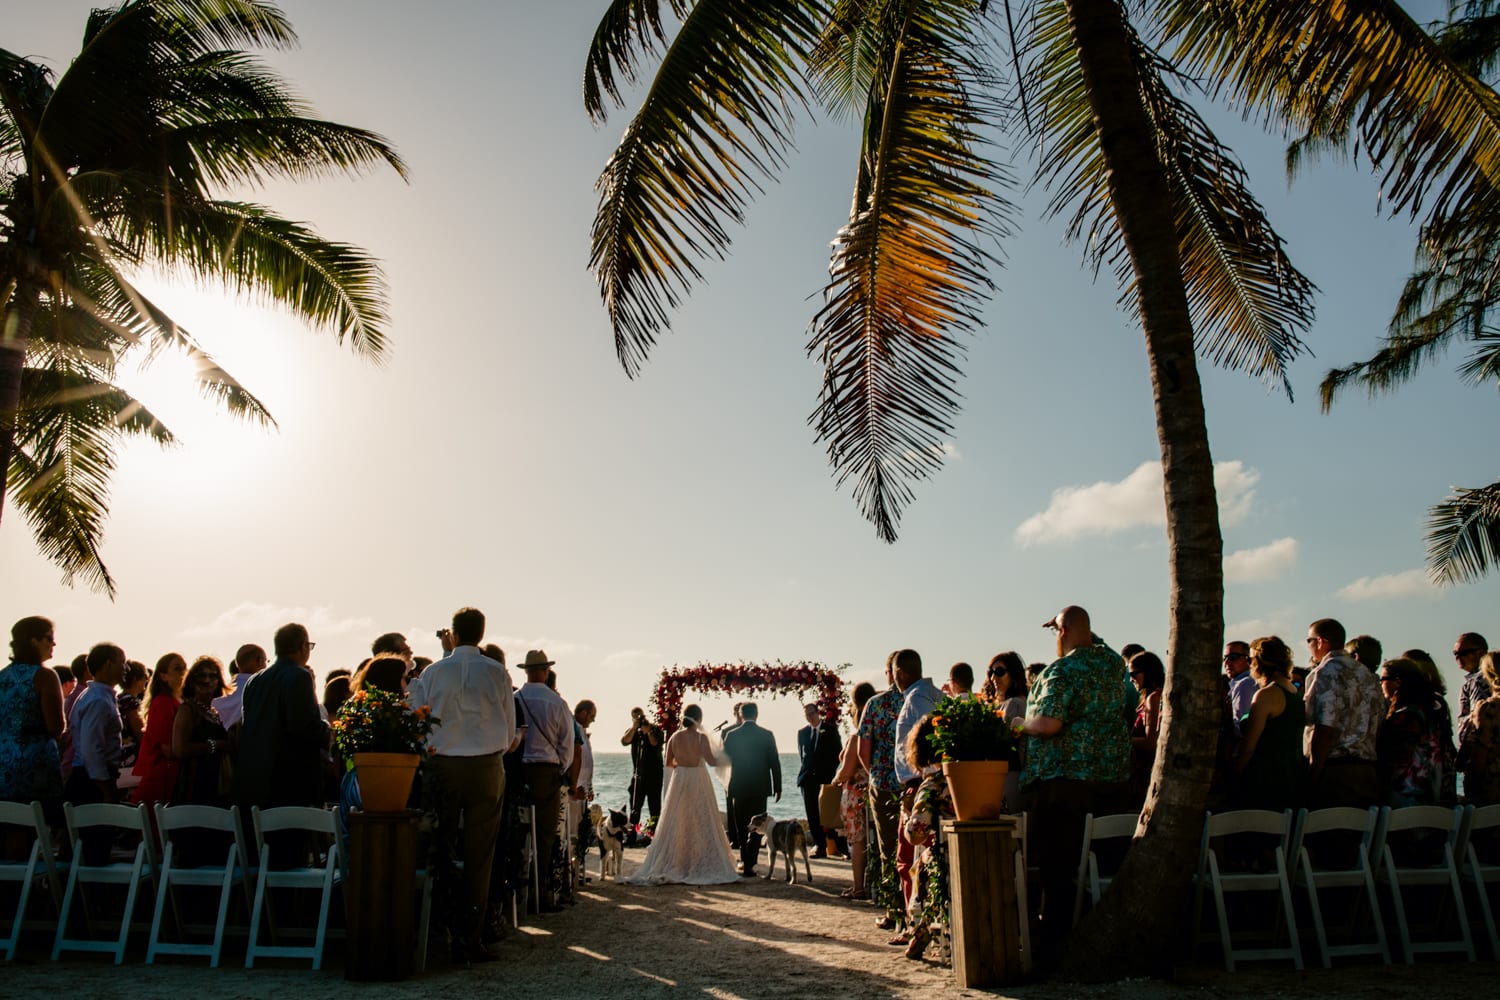 A Fort Zachary Taylor beach wedding ceremony with palm trees in the background.